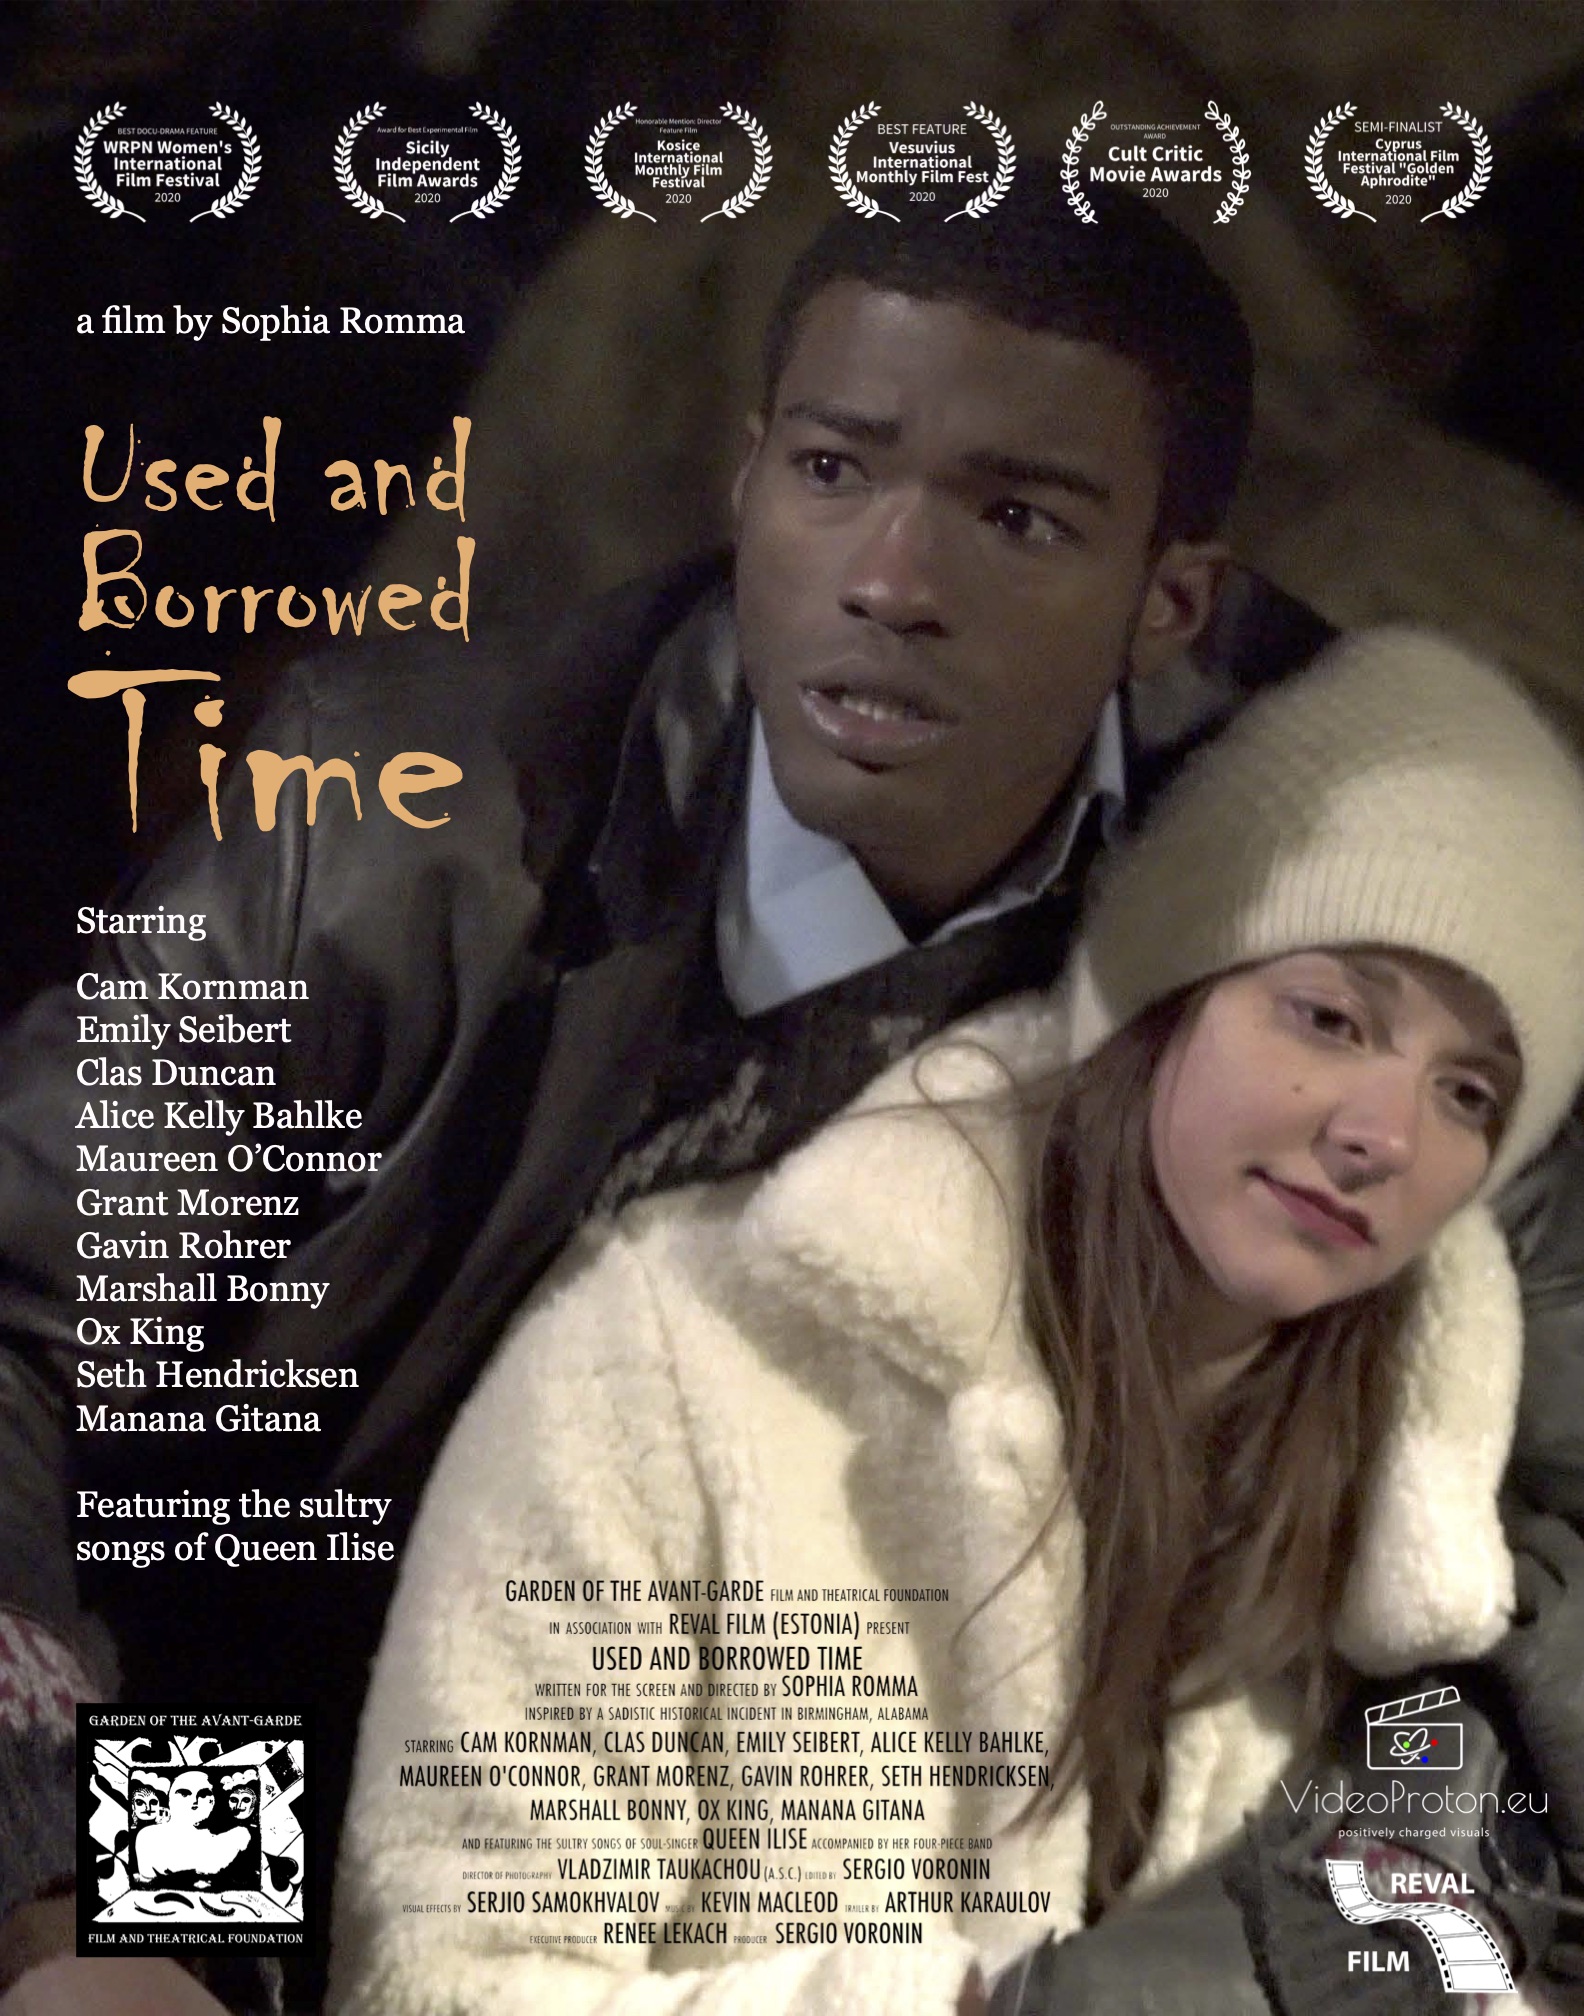 Used and Borrowed Time (2020)